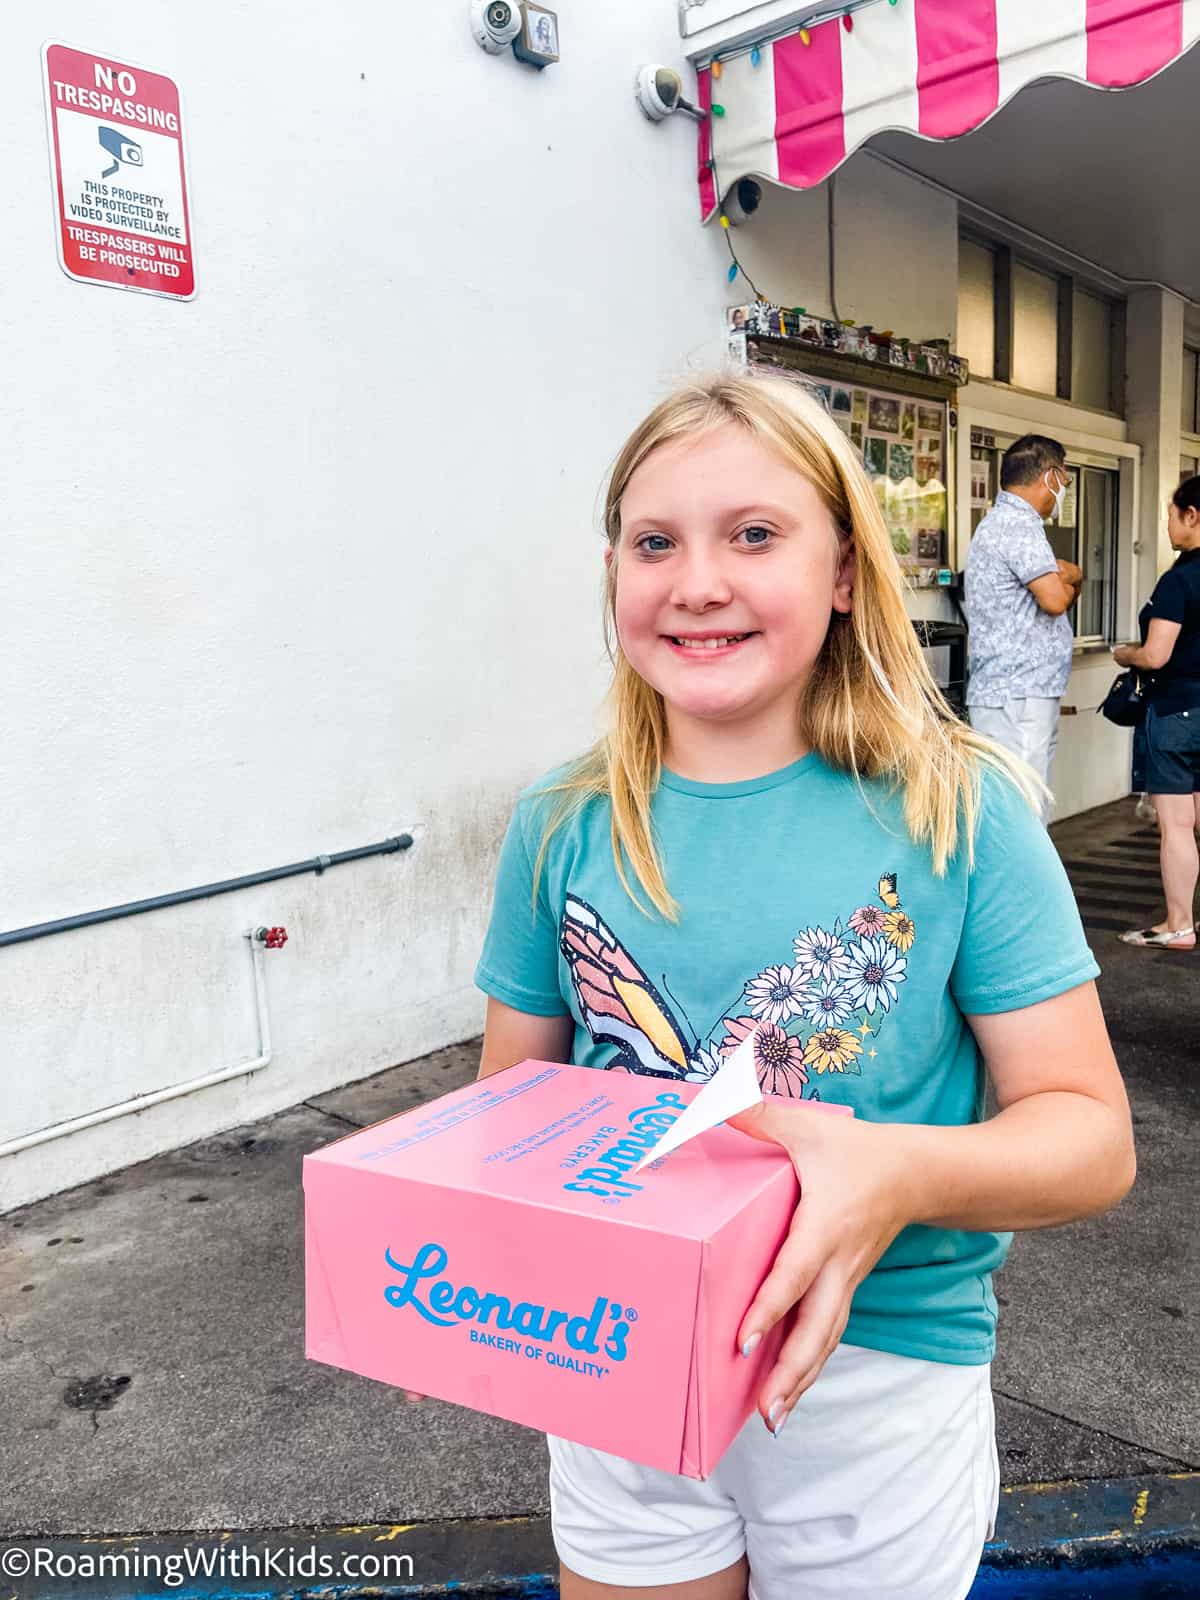 The Best Things to Do in Oahu With Kids - Malasadas from Lenard's Bakery